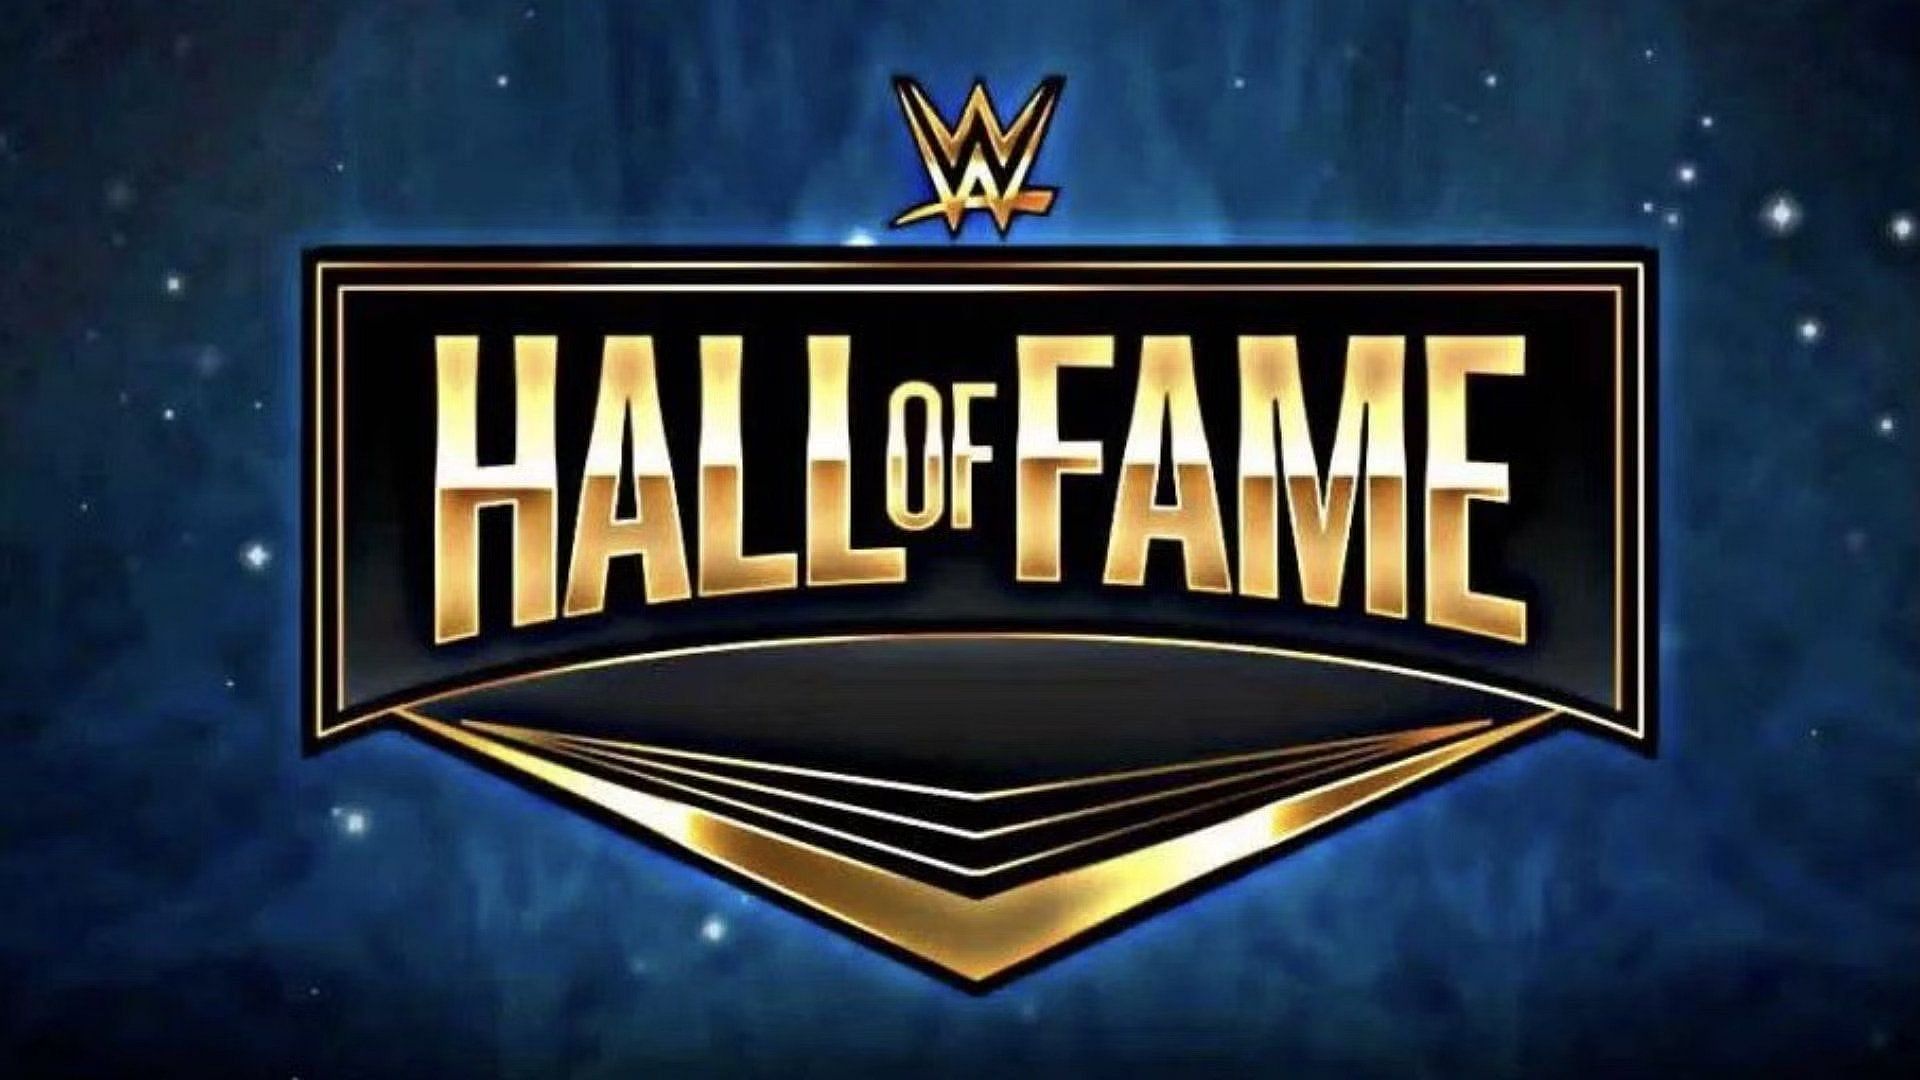 WWE Hall of Famer intends to return to in-ring action